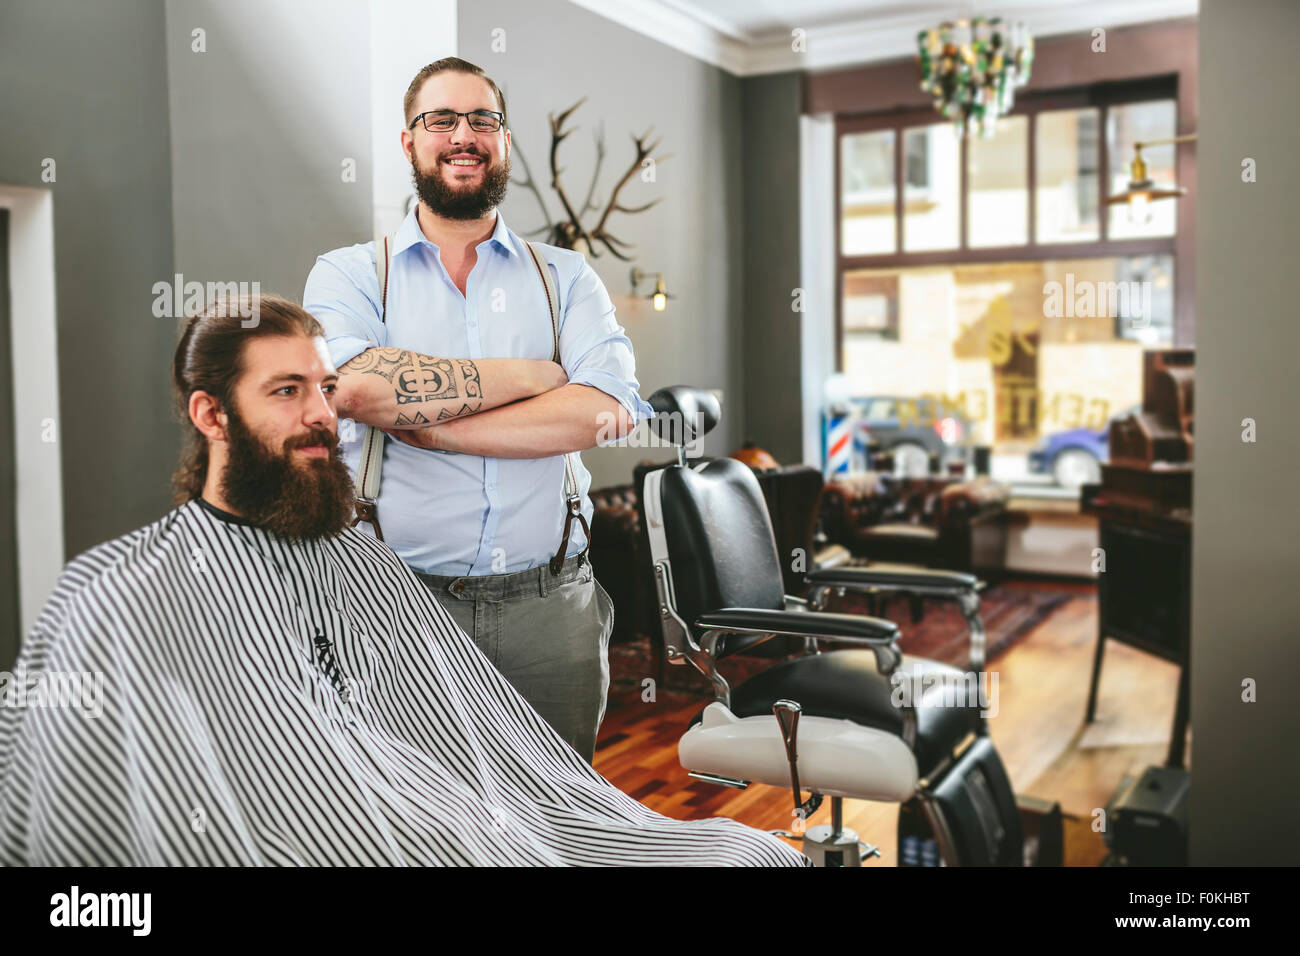 Portrait of smiling barber with customer in barber shop Stock Photo - Alamy